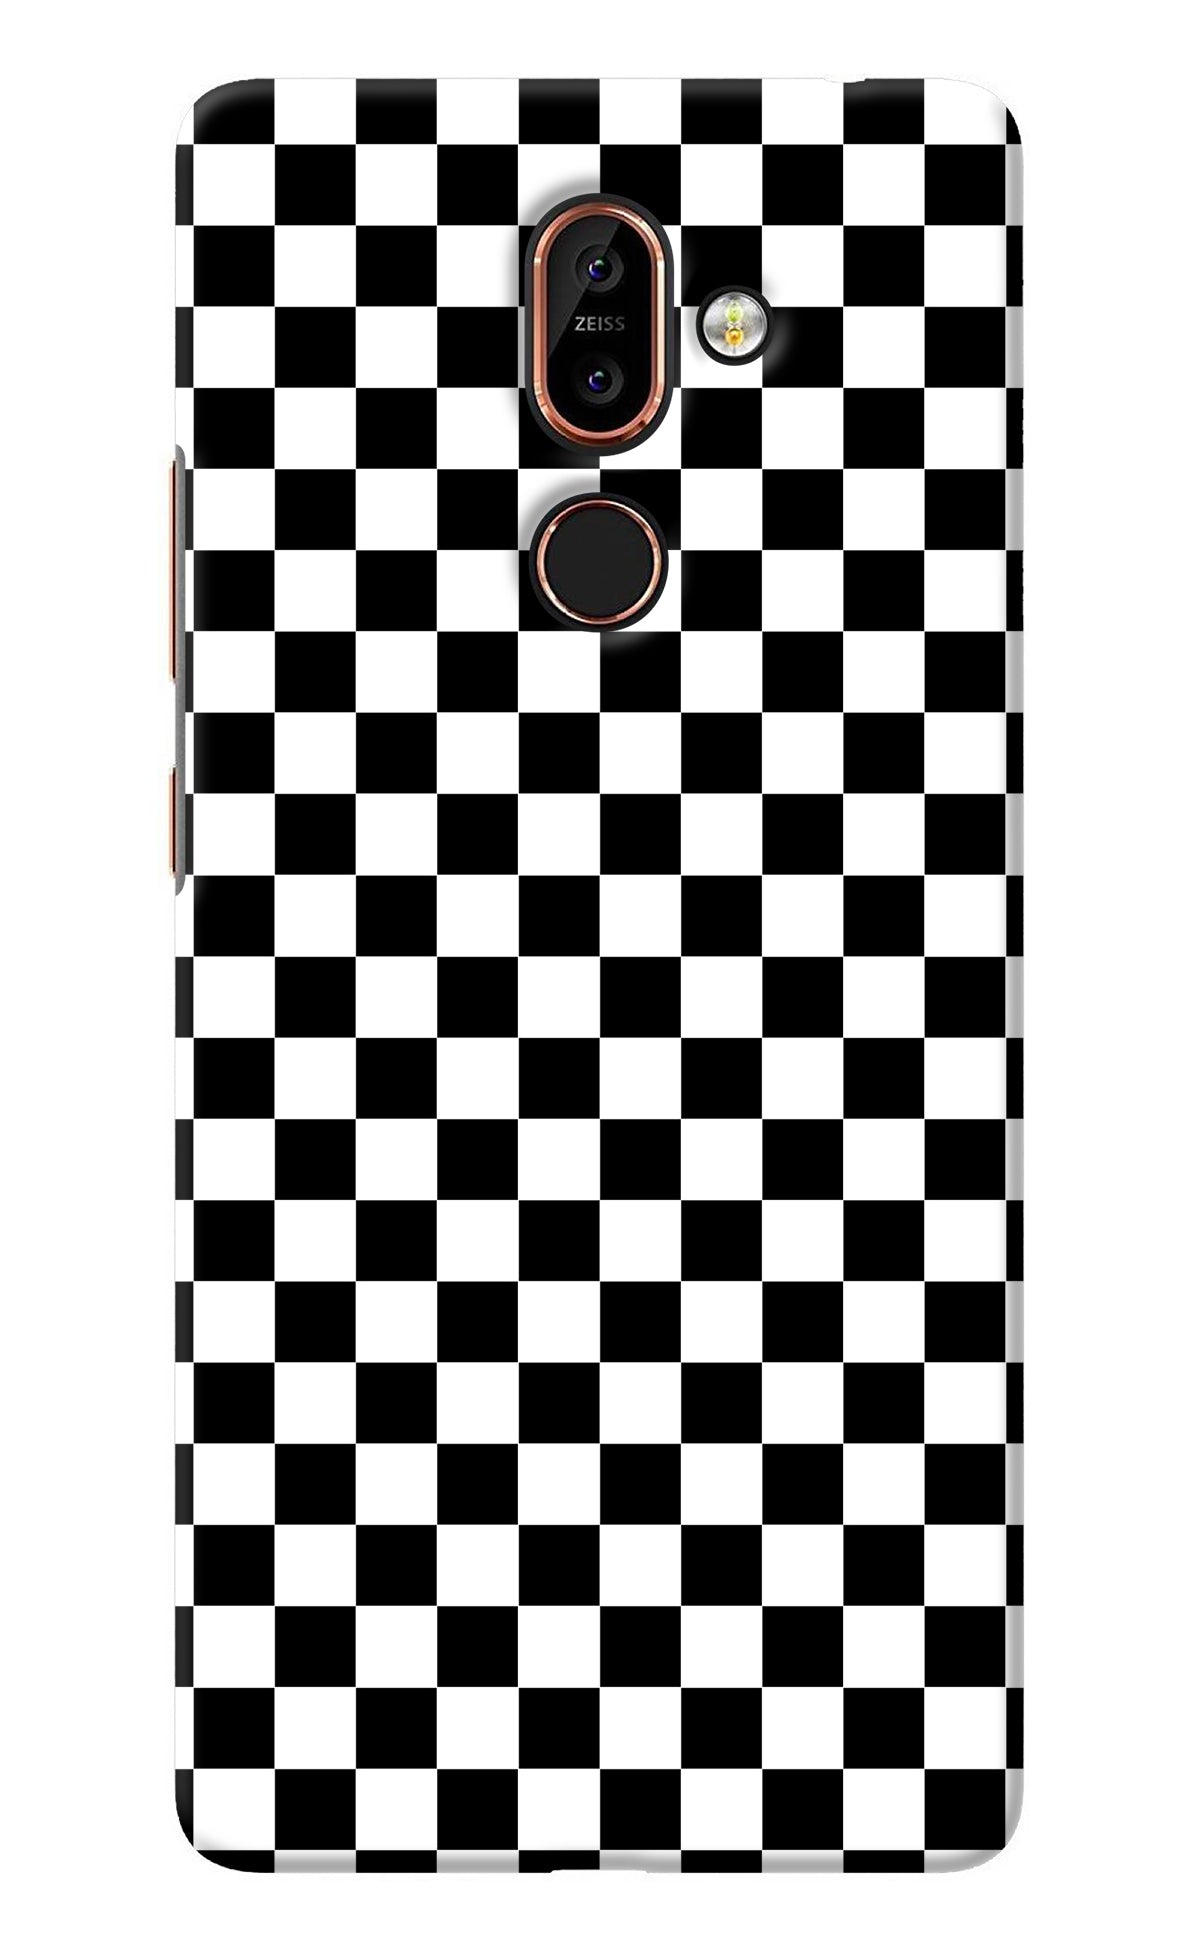 Chess Board Nokia 7 Plus Back Cover